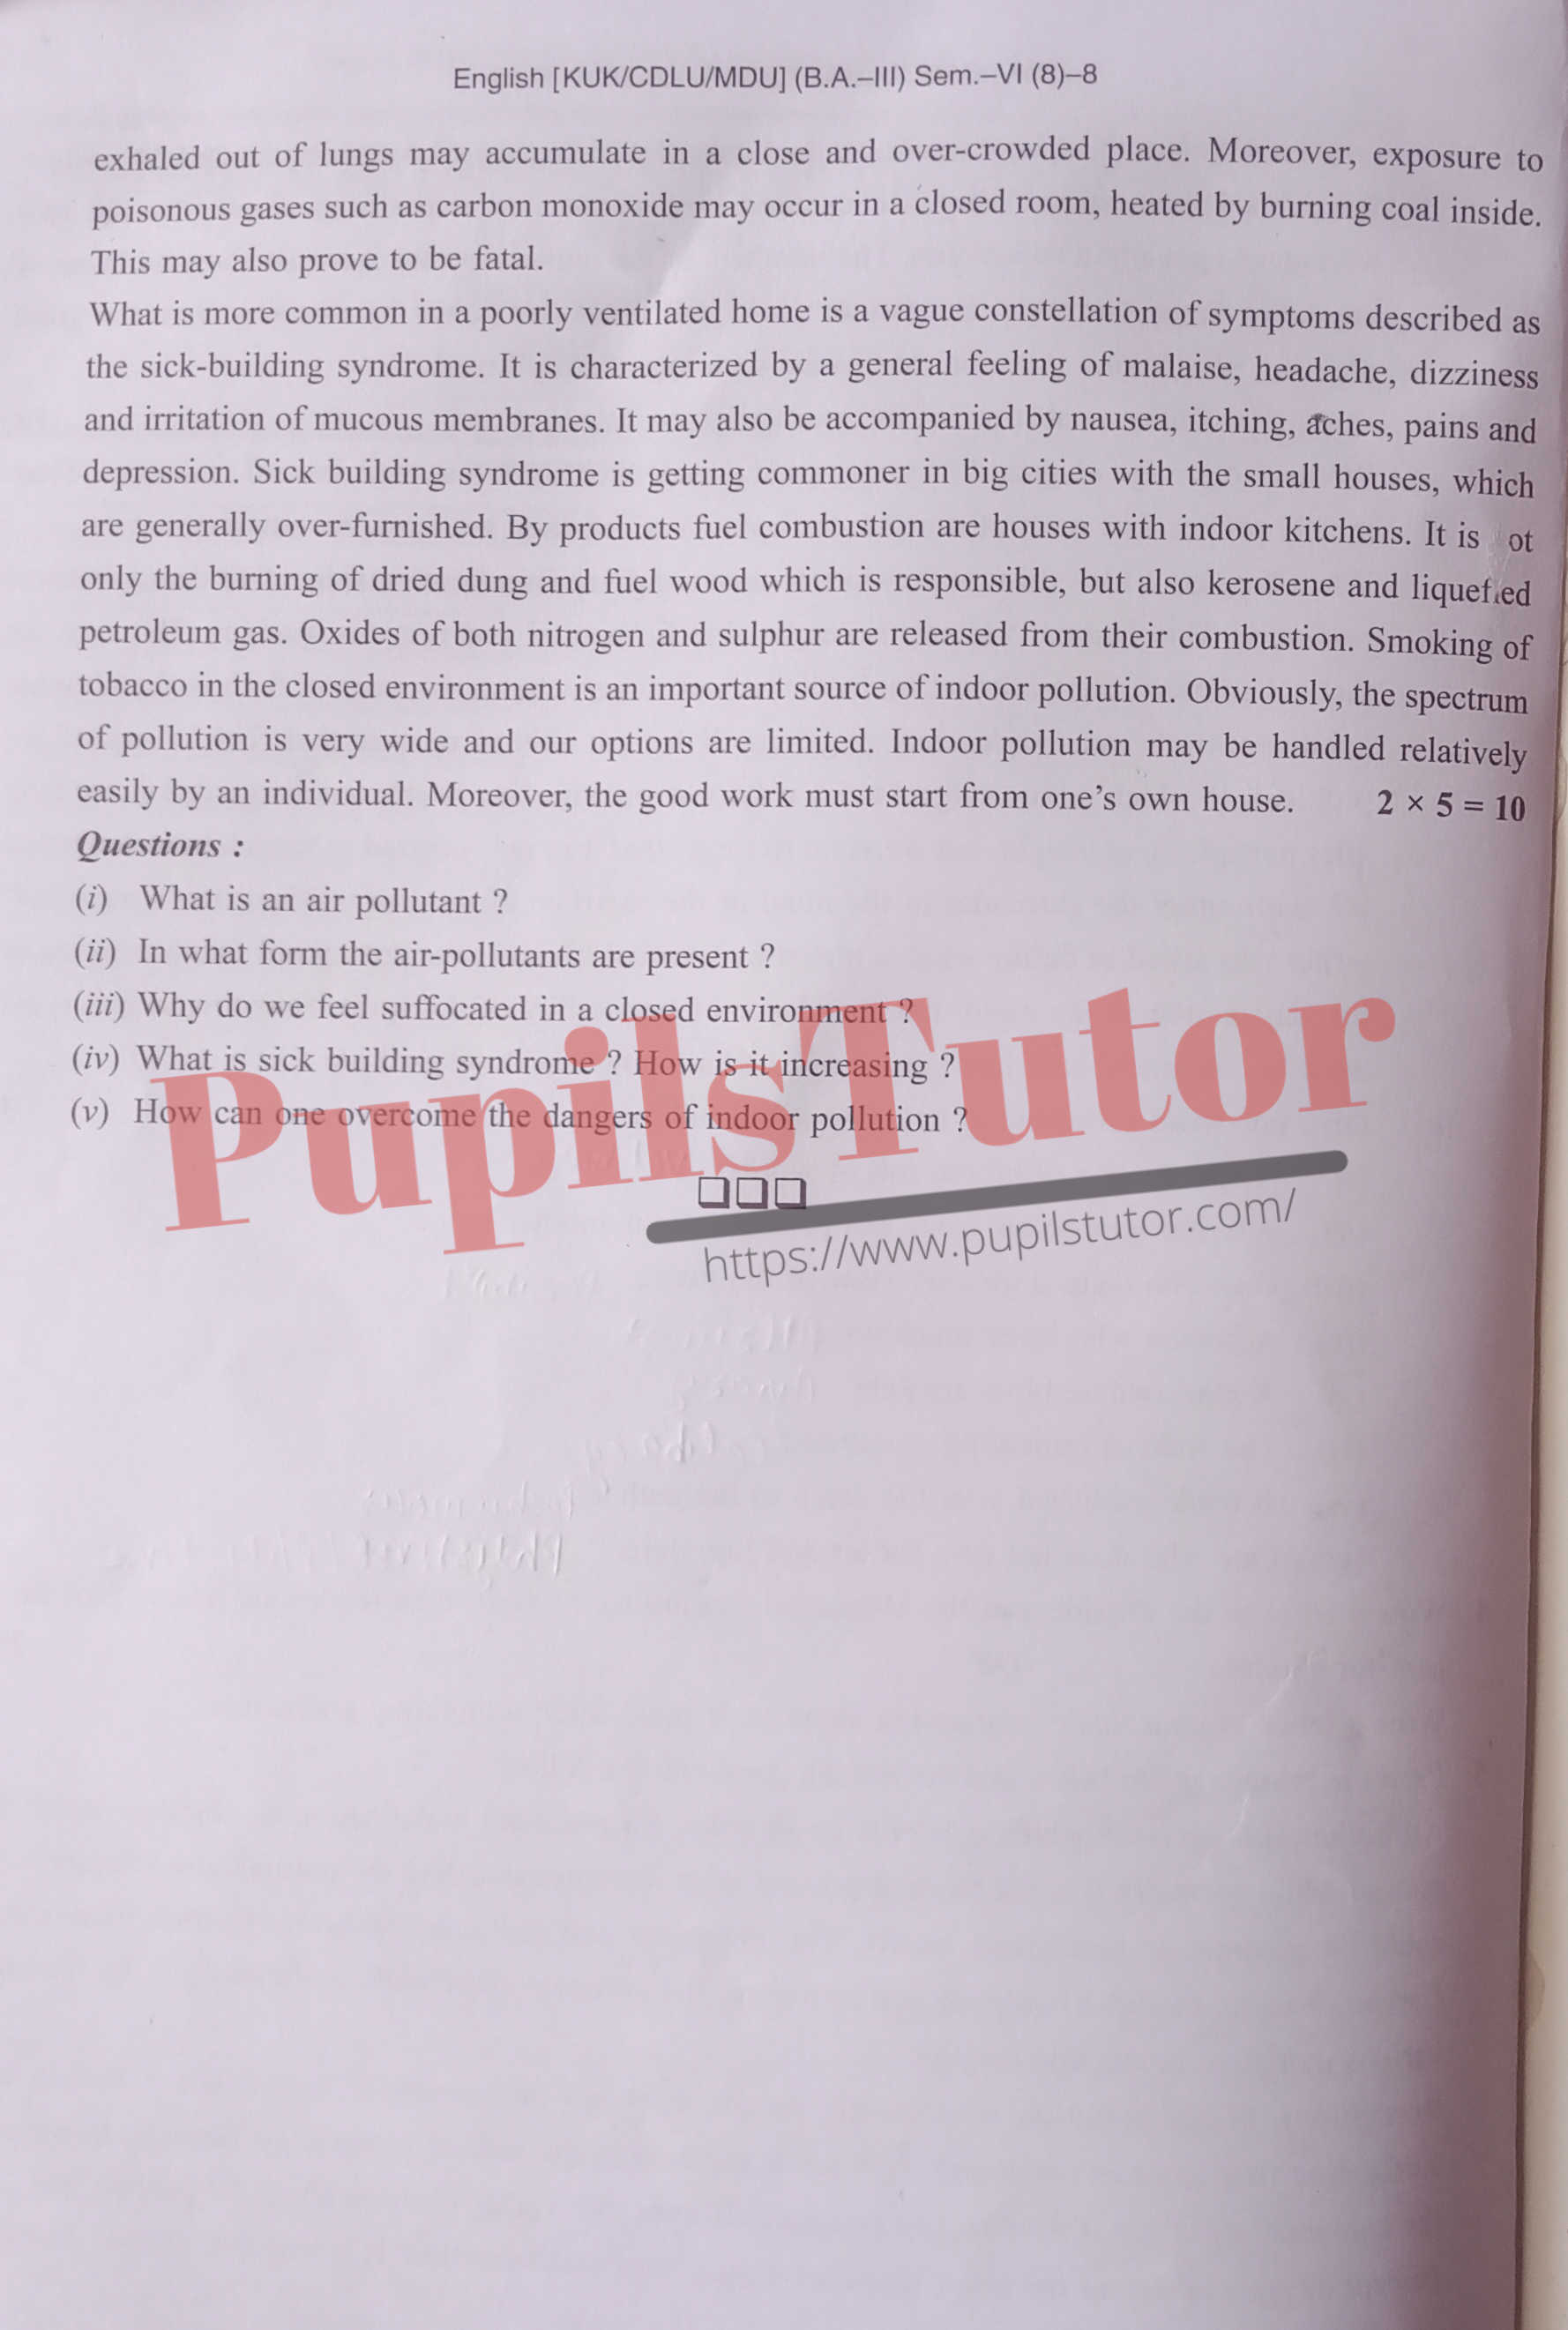 Free Download PDF Of M.D. University B.A. Sixth Semester Latest Question Paper For English Subject (Page 3) - https://www.pupilstutor.com